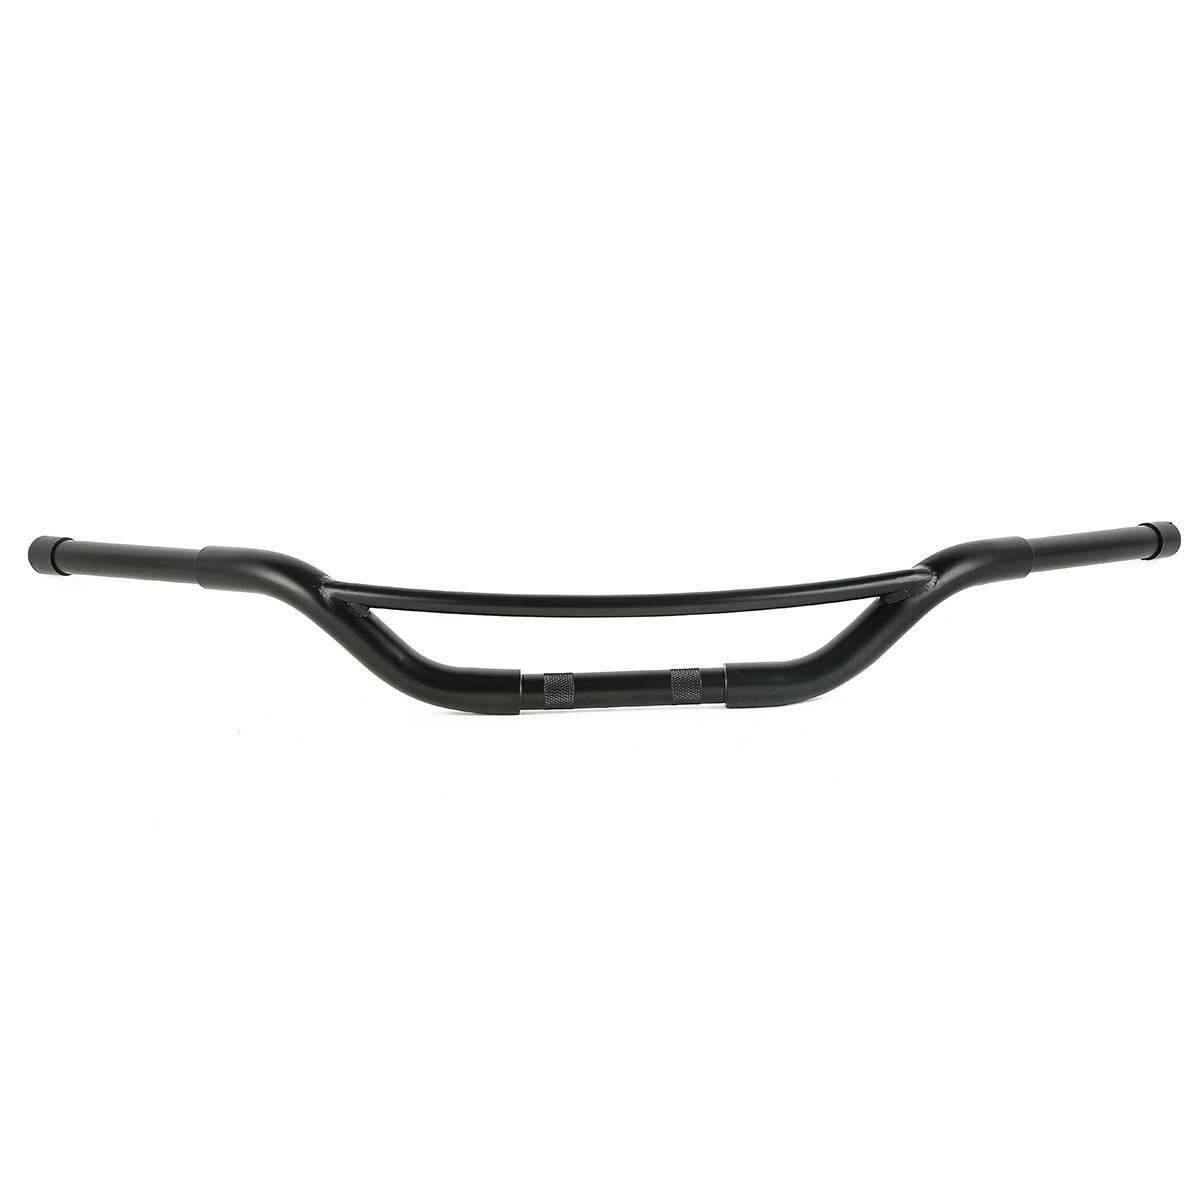 Black 1-1/4"Fat Ape Handle Handle Bar Fit For Harley Sportster Softail Dyna FXDB - Moto Life Products